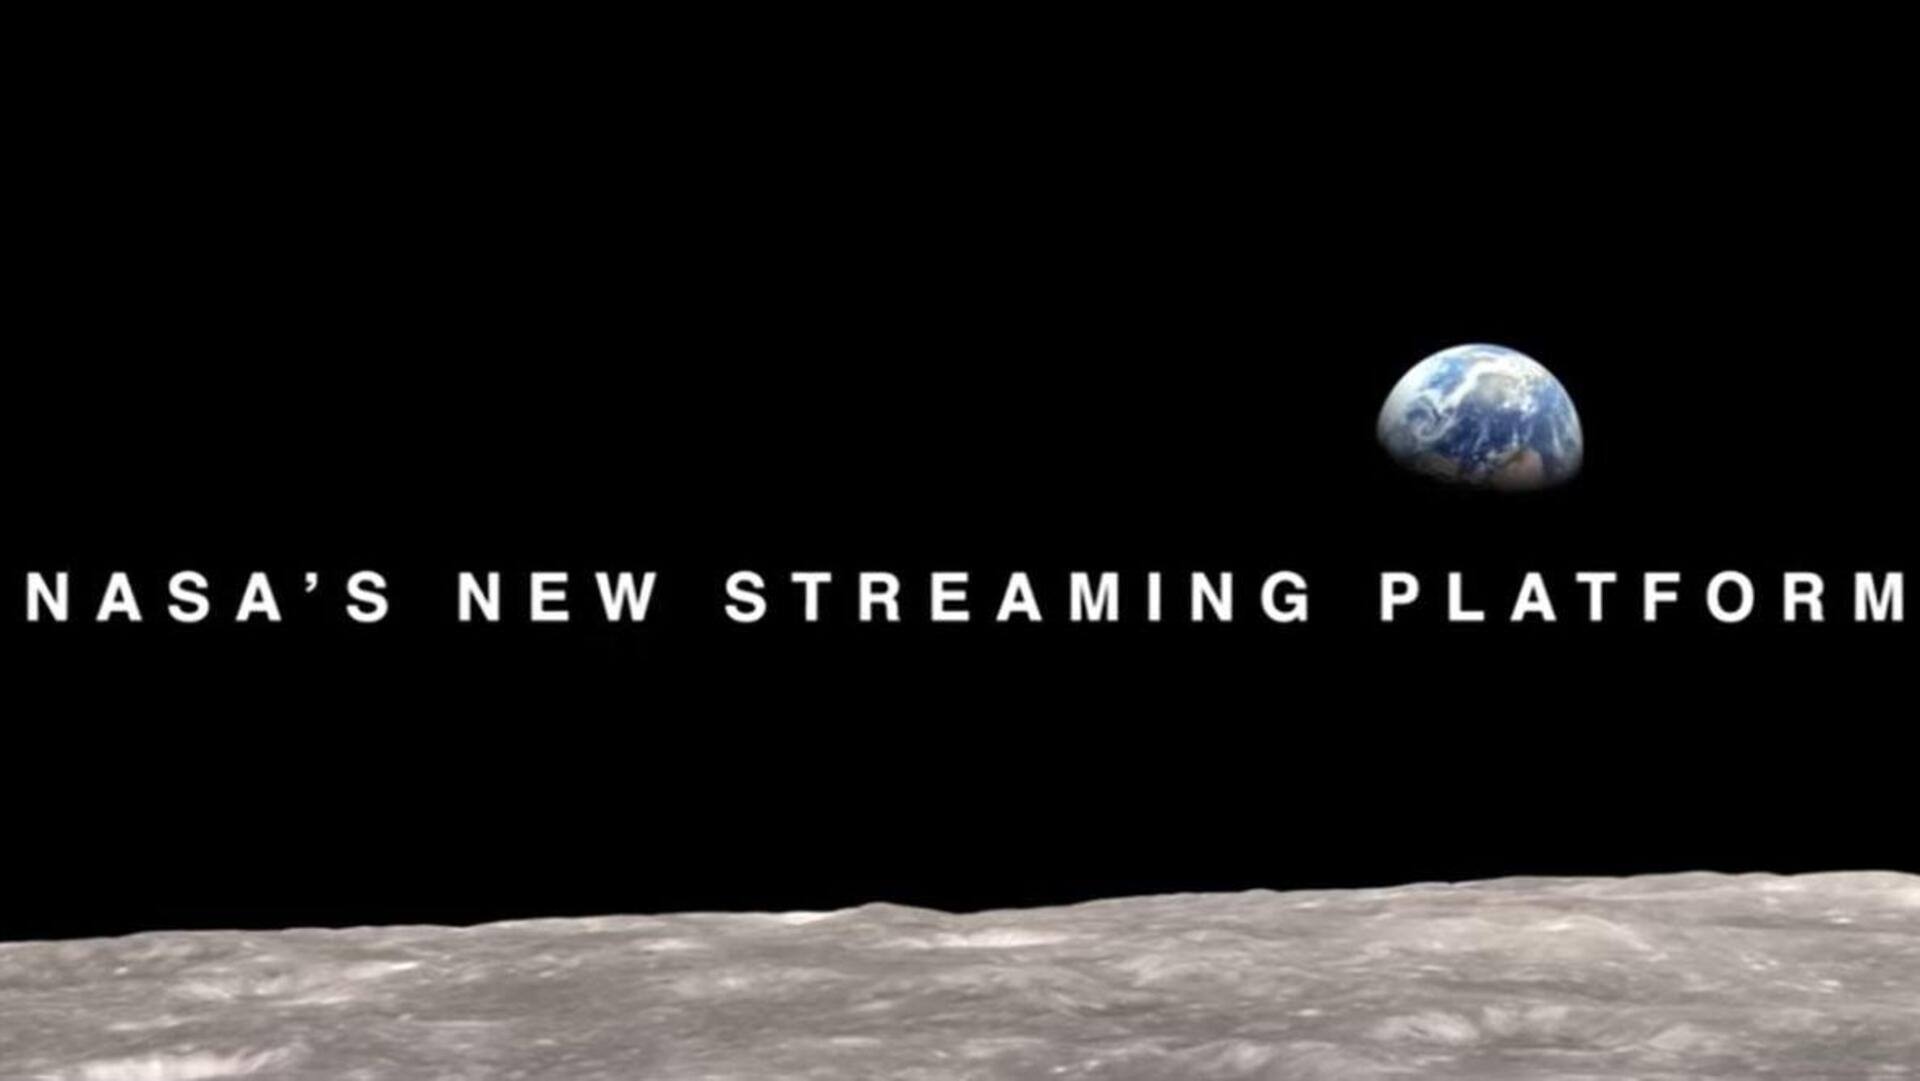 NASA's streaming service launches this week: Check what it'll offer